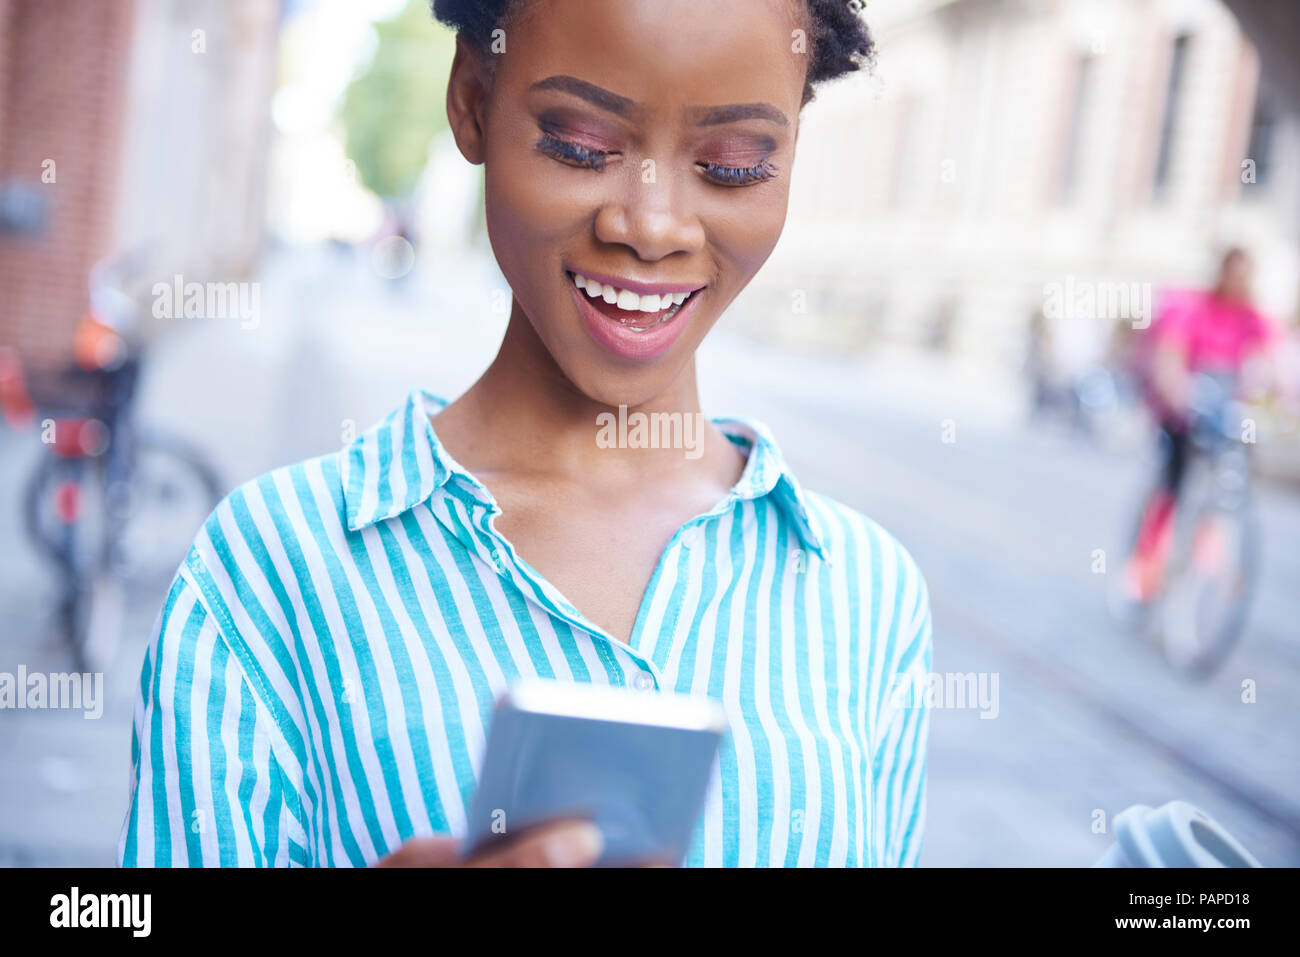 Portrait of smiling woman looking at cell phone Stock Photo